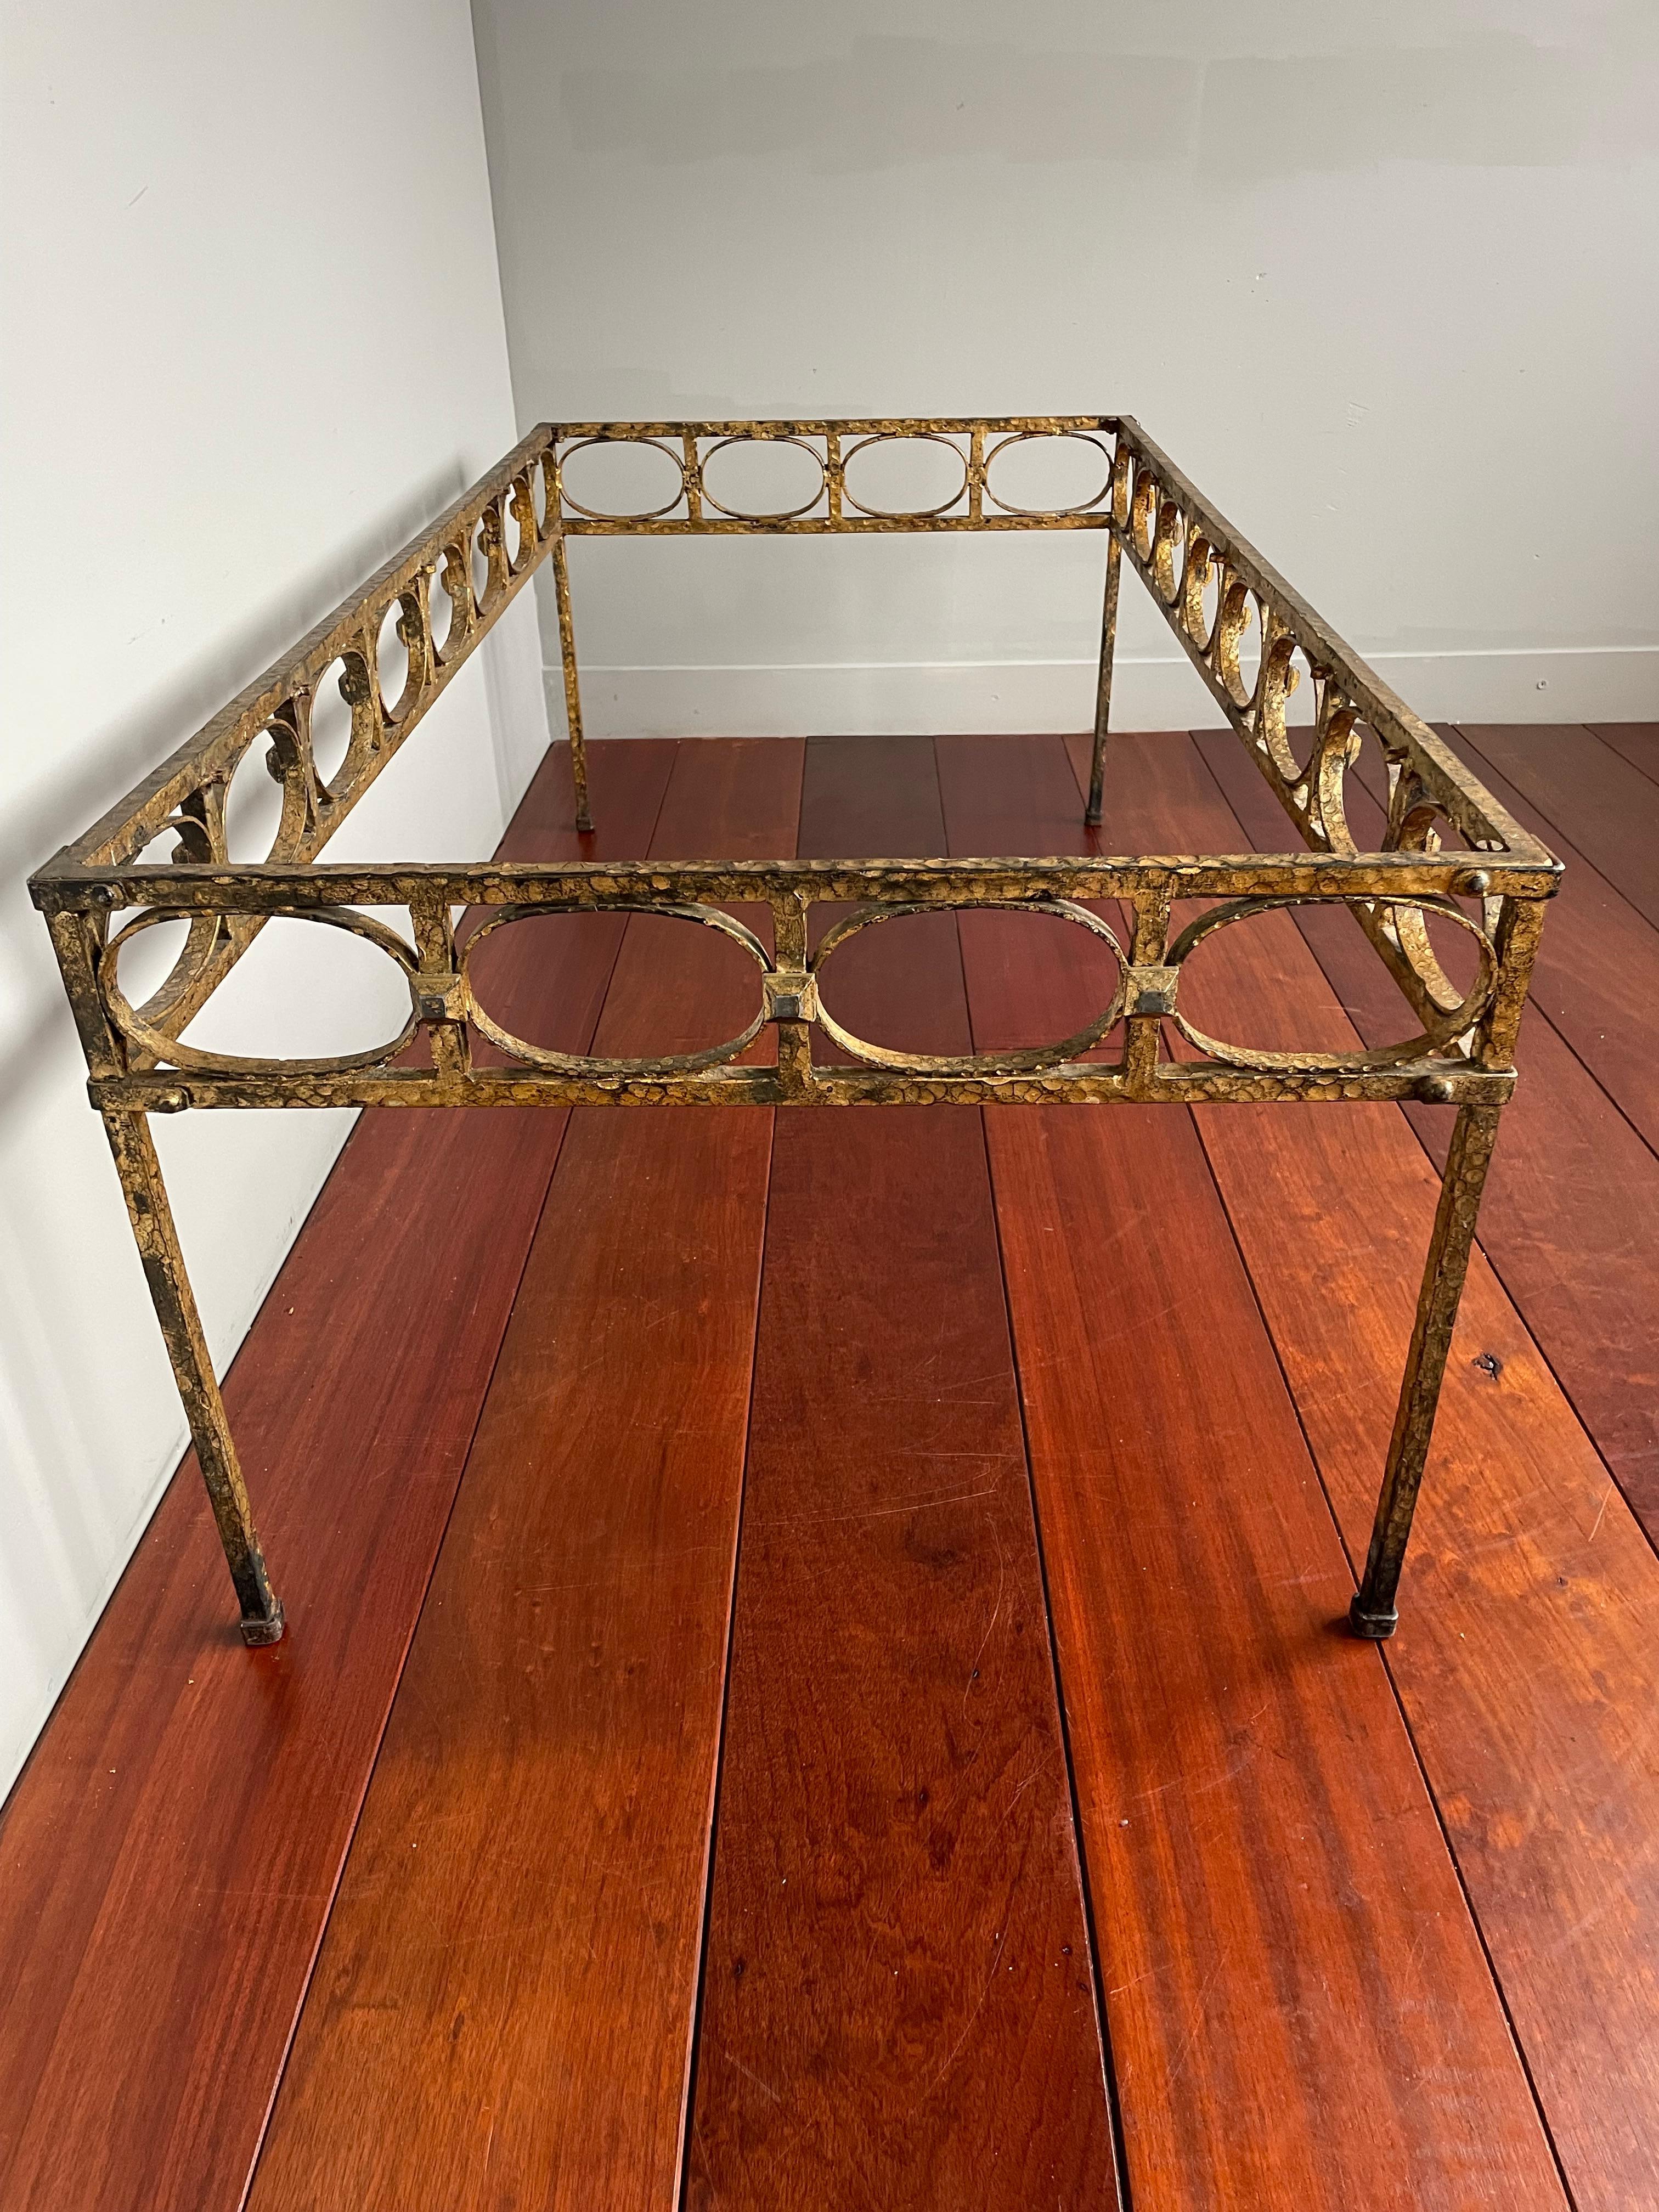 Forged Stunning Midcentury Modern Gilt Wrought Iron Coffee Table Base by Ferro Art 1950 For Sale